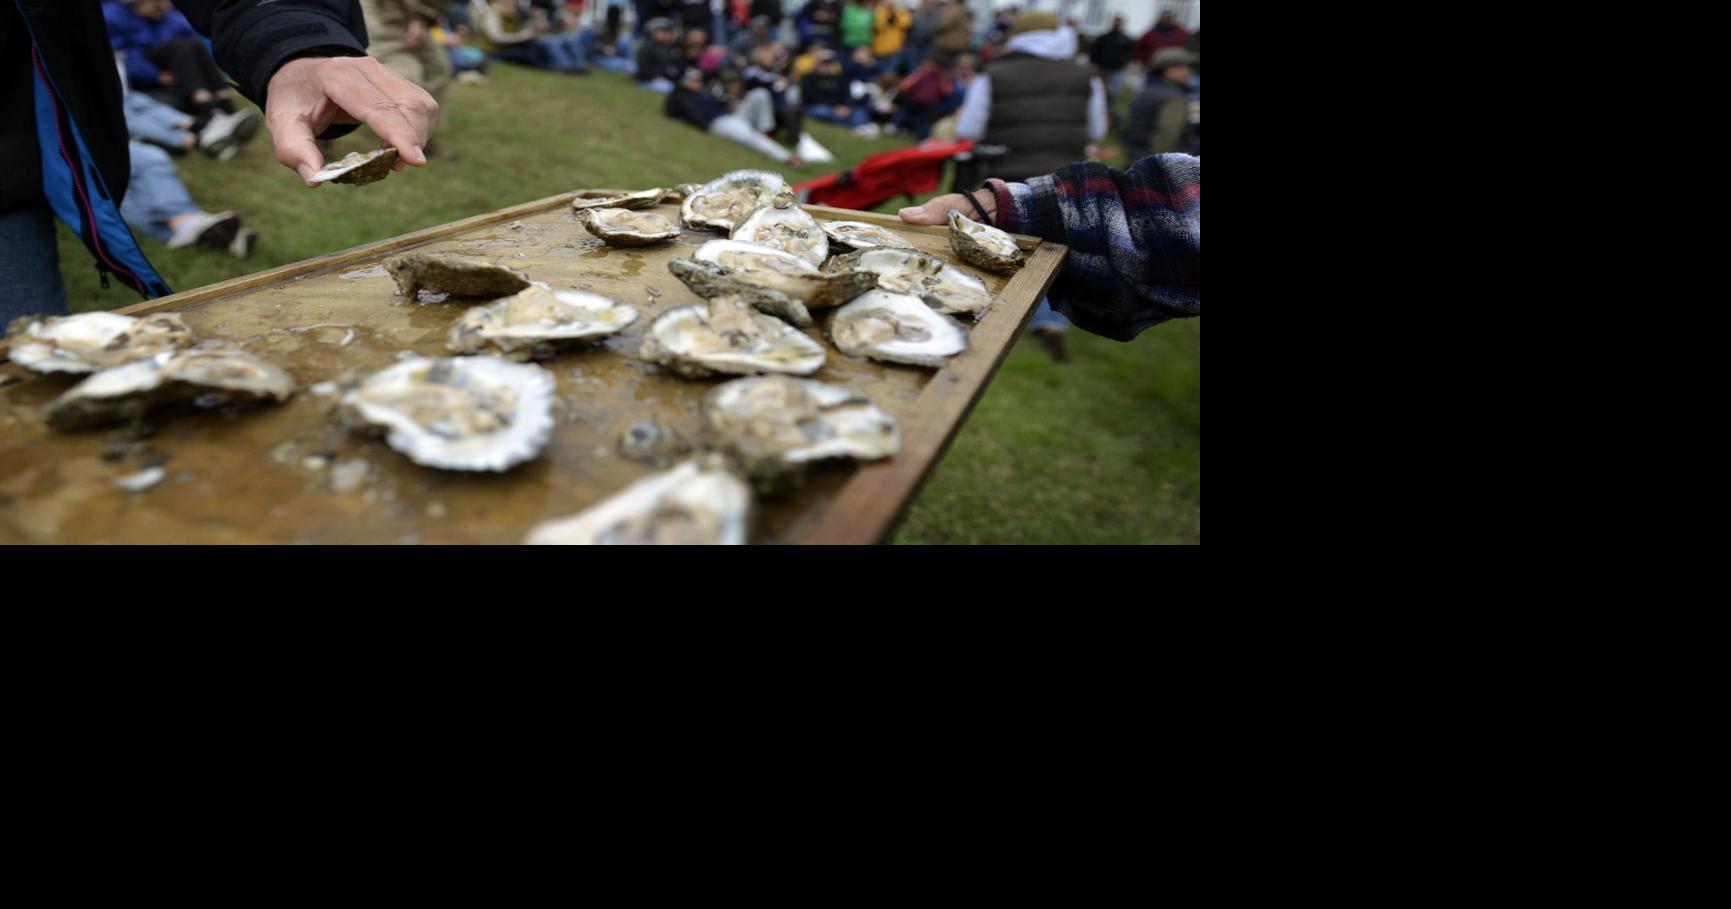 Urbanna Oyster Festival, Virginia Film Festival, Psychedelic Furs and